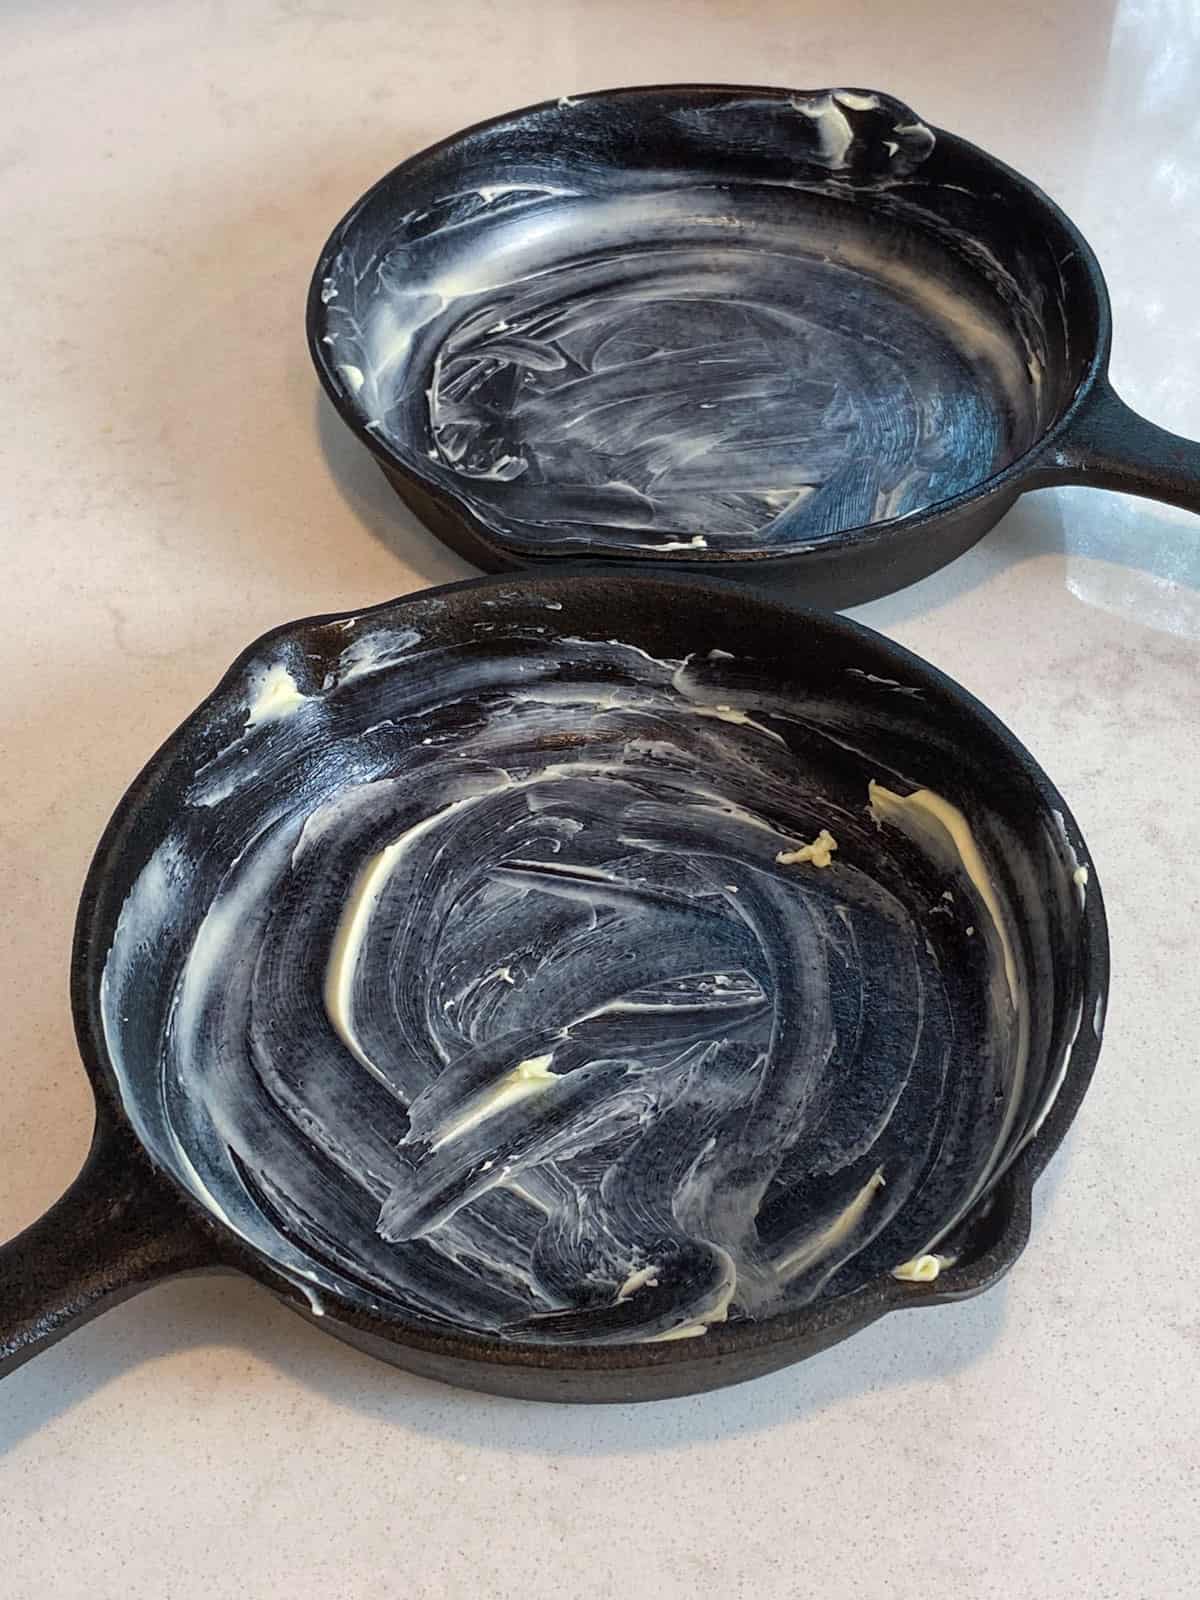 Butter the cast iron skillets all over with softened butter.